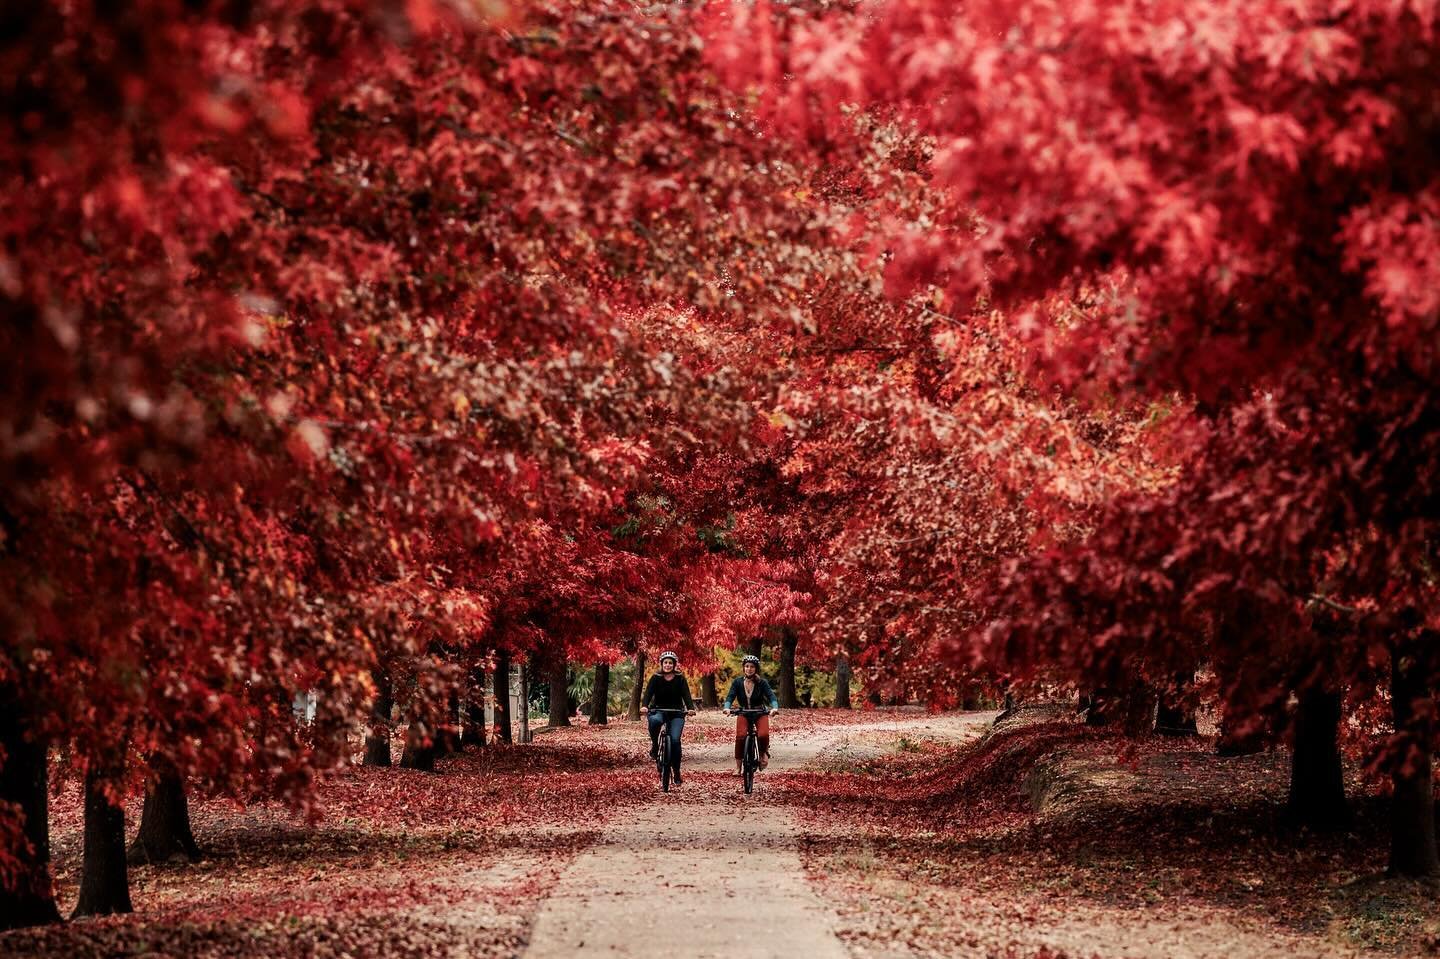 I had a fun few days hanging out in Beechworth, Myrtleford &amp; Yackandandah shooting some rail trails for @tourism_north_east. The autumn leaves this year have been AMAZING!!